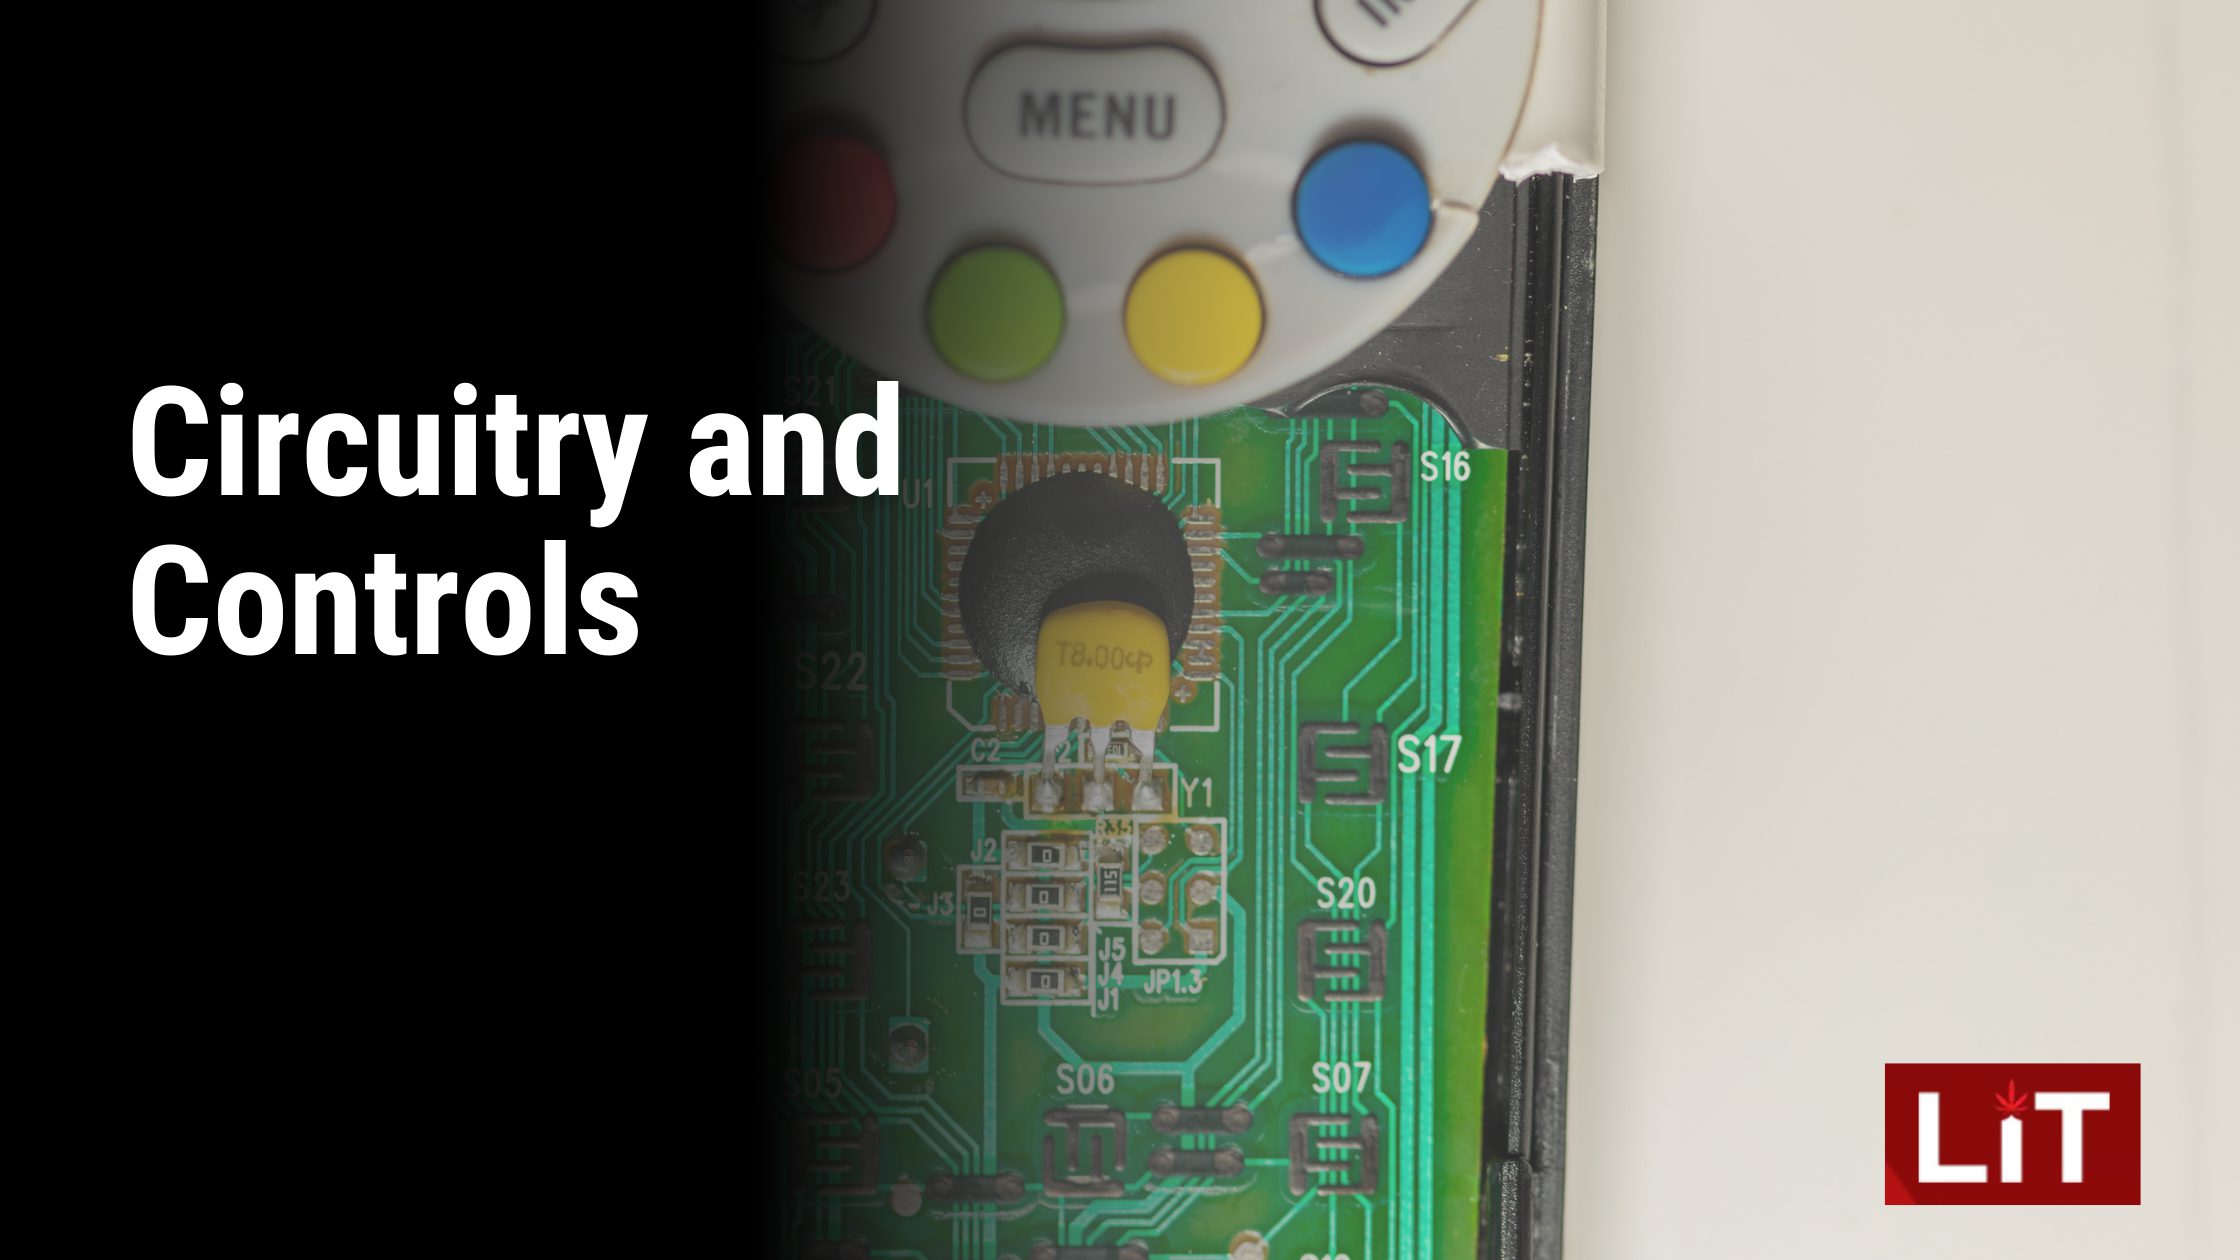 Circuitry and Controls